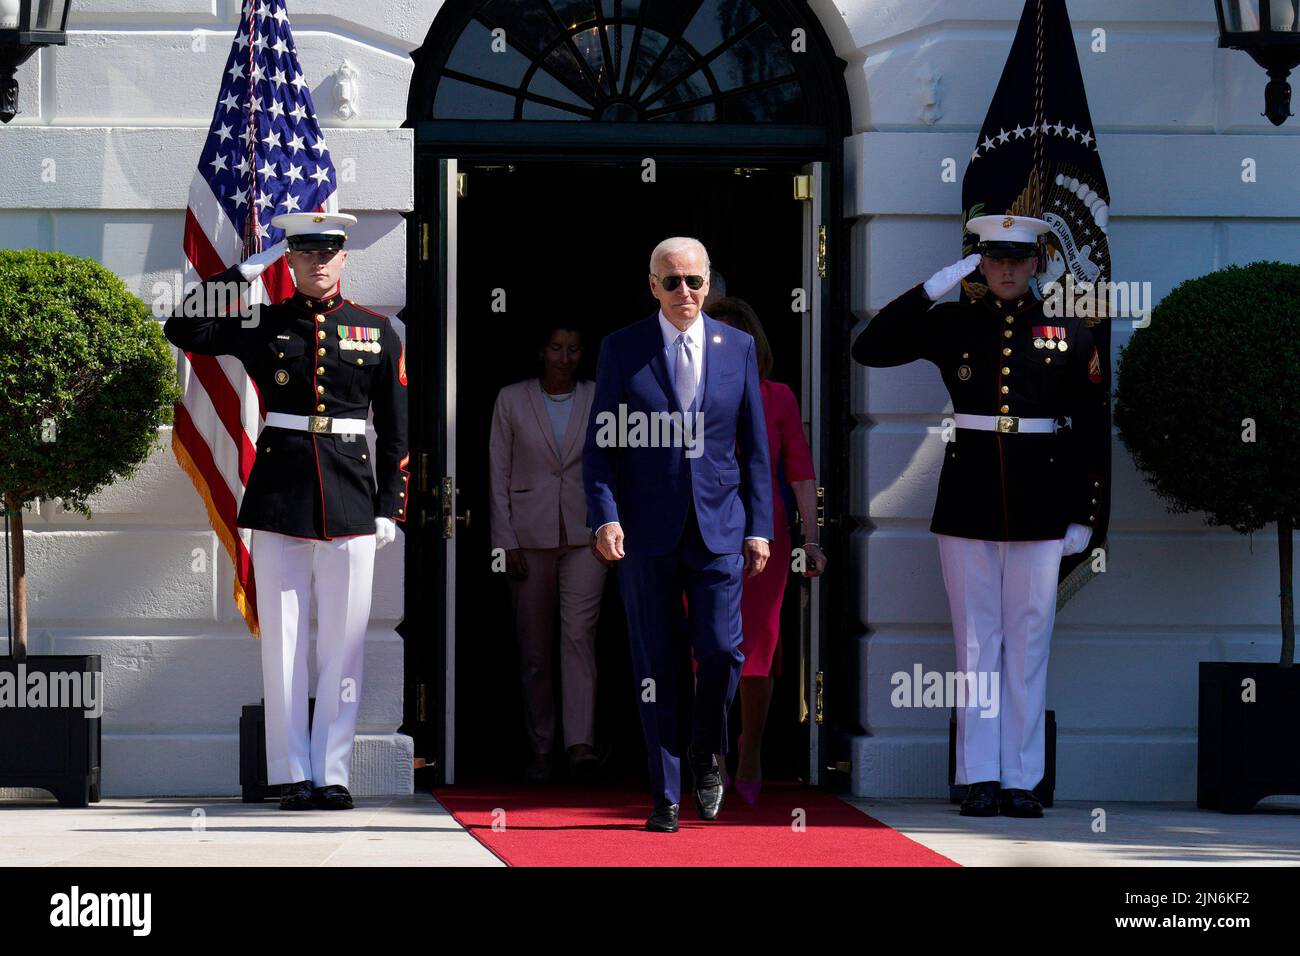 U.S. President Joe Biden walks out to deliver remarks and sign into law the CHIPS and Science Act during a ceremony on the South Lawn of the White House in Washington on August 9, 2022. Photo by Yuri Gripas/ABACAPRESS.COM Stock Photo